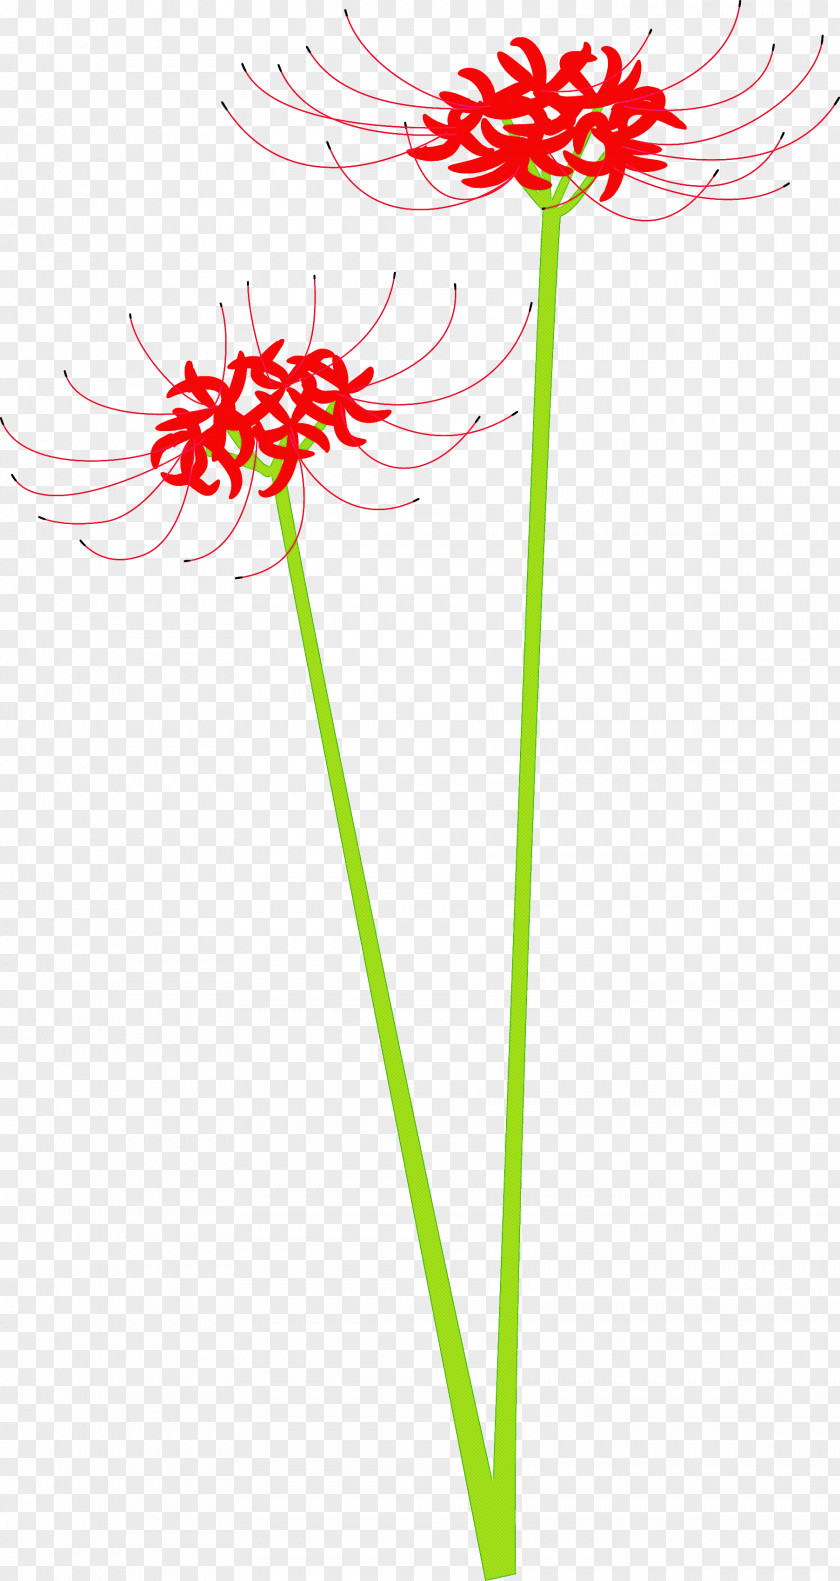 Hurricane Lily Flower PNG